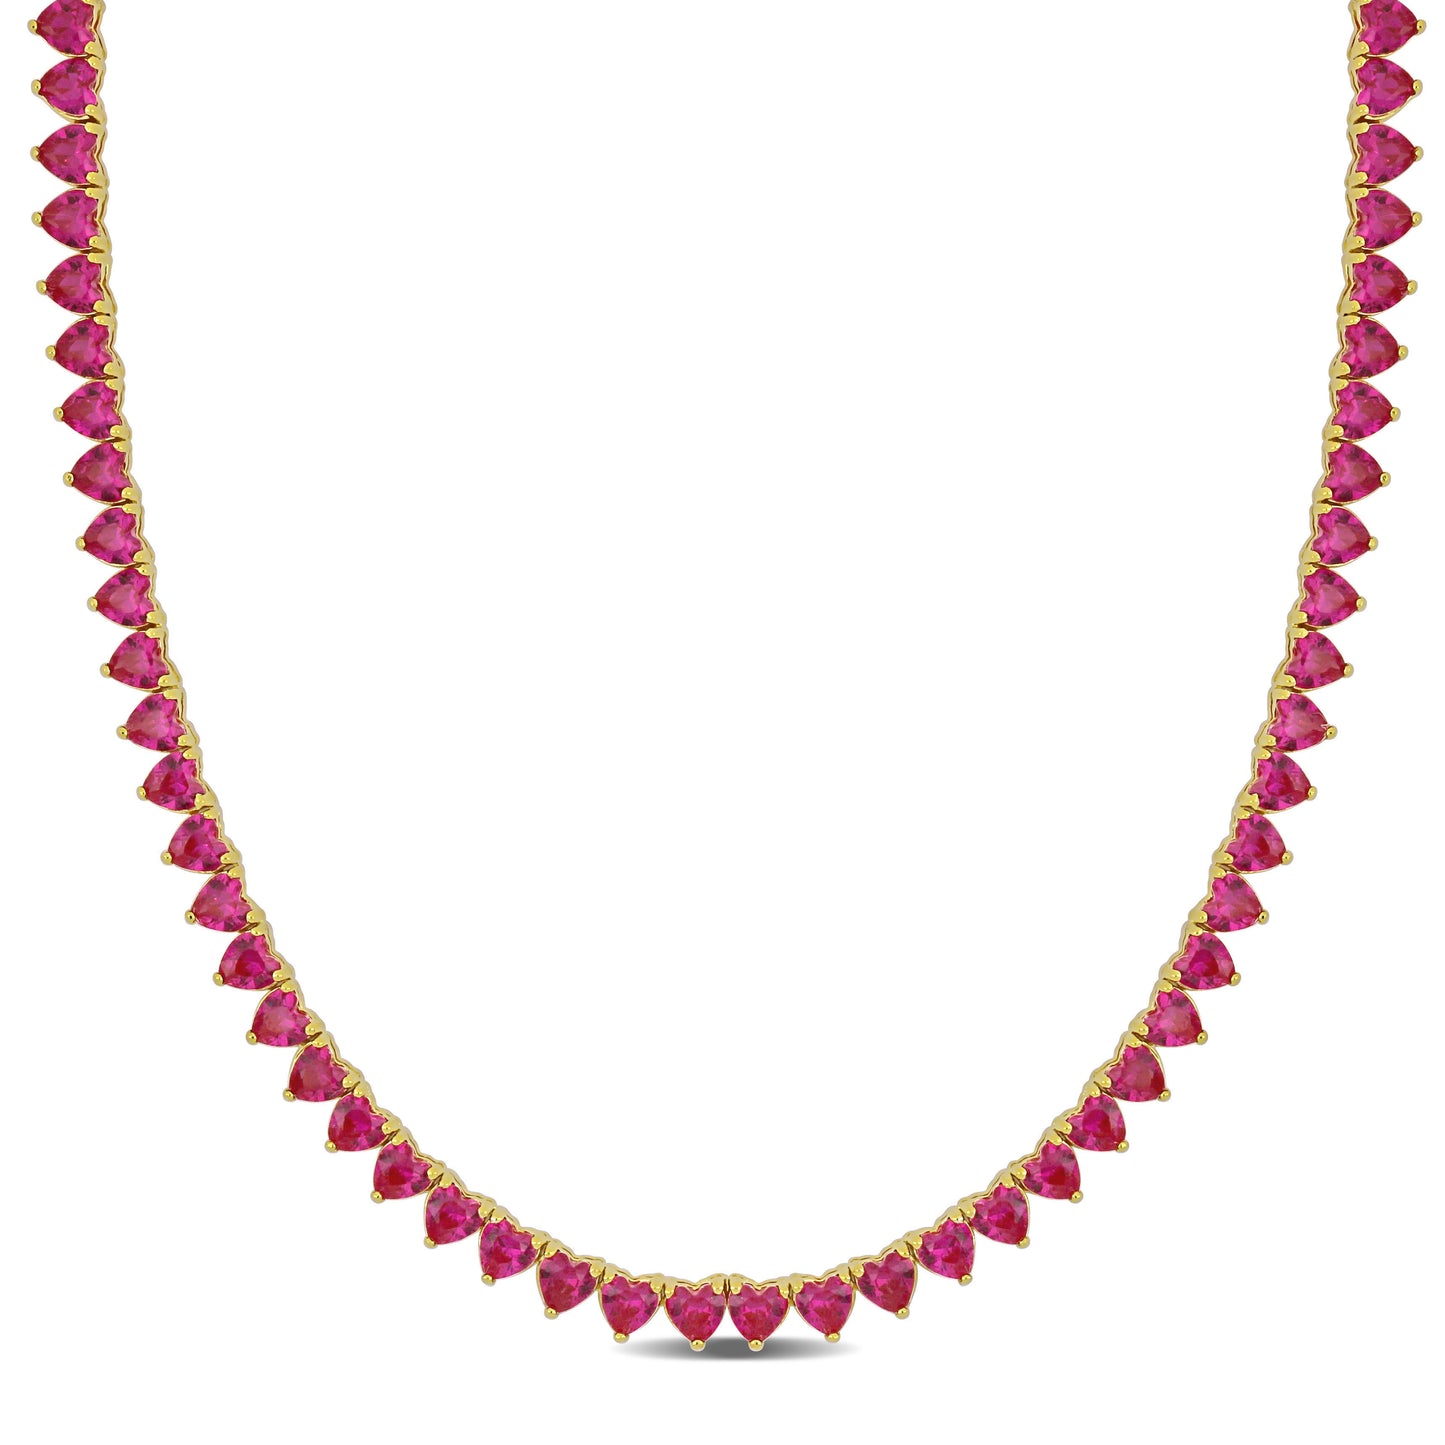 31.2 ct TGW Created ruby necklace silver 18k yellow gold plated tongue and groove clasp length (inches): 18